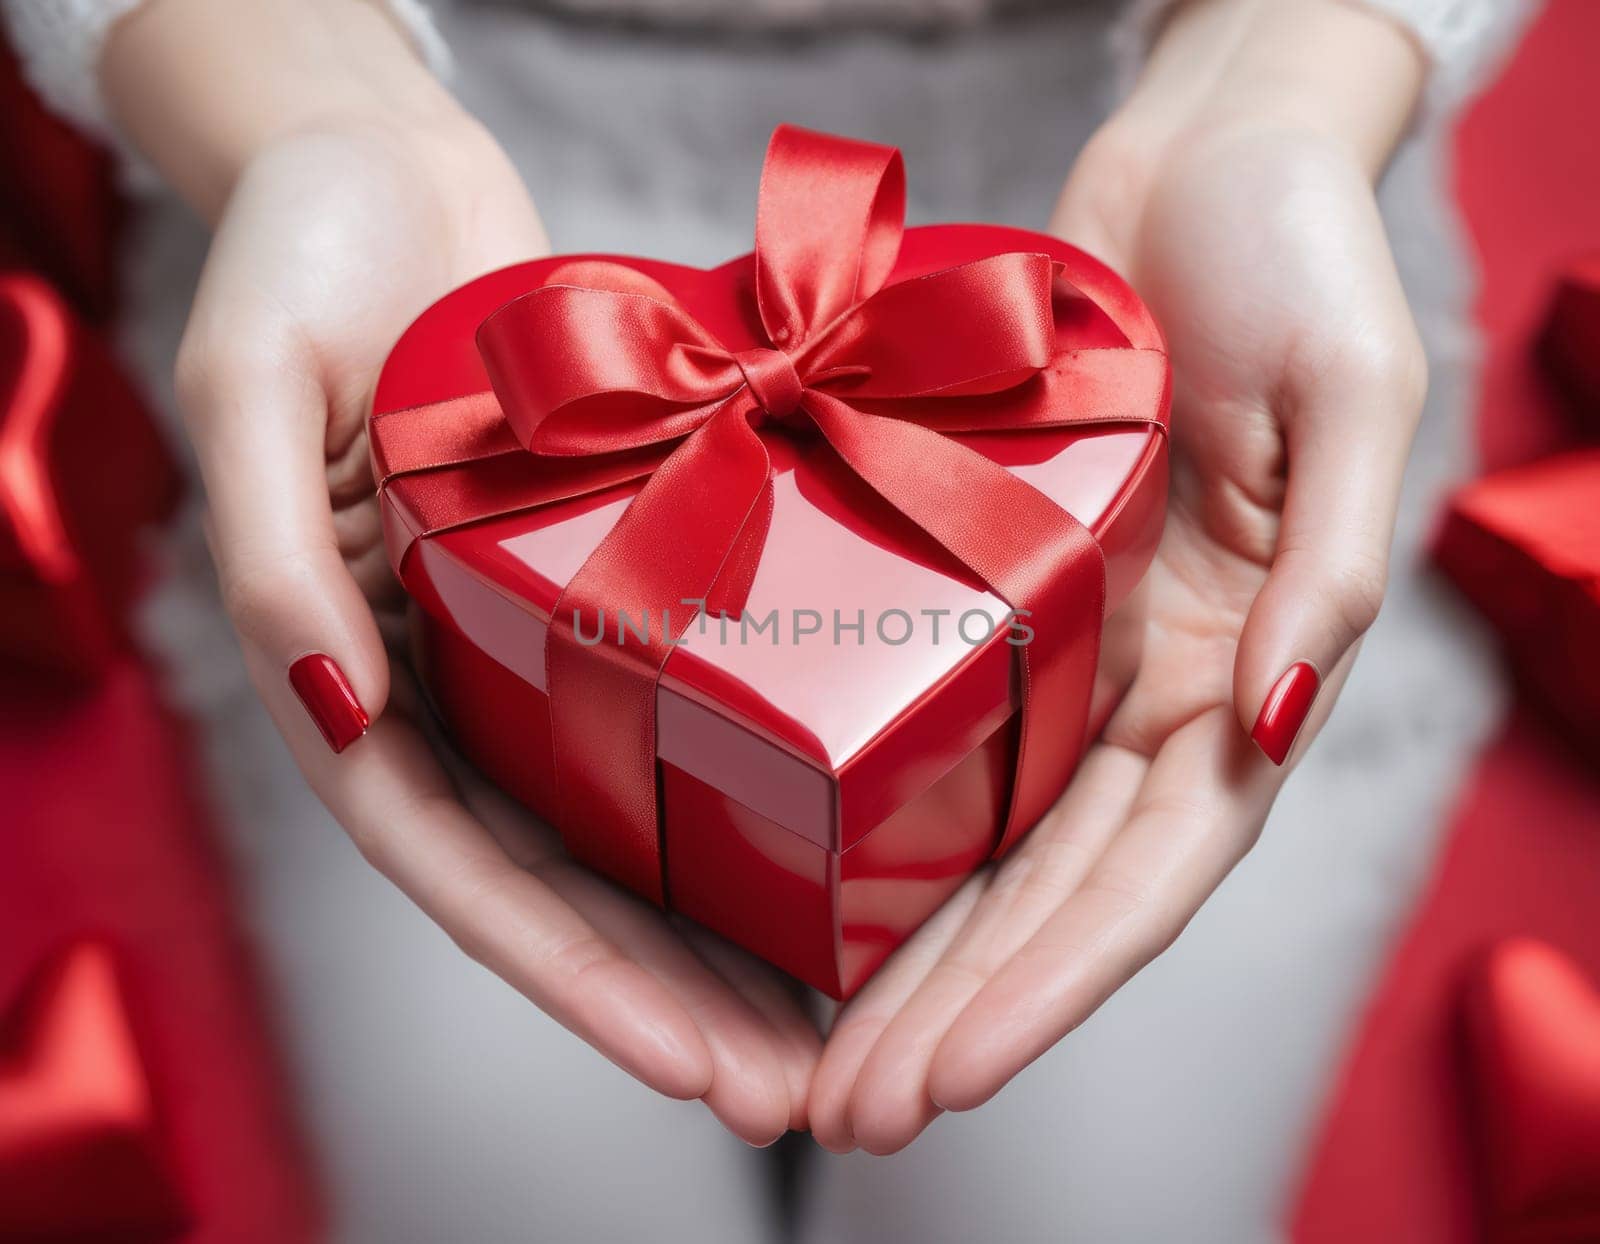 The image captures a tender moment of affection or love, with a warm and intimate setting. The wooden background contrasts with the smoothness of the hands and the gift box.